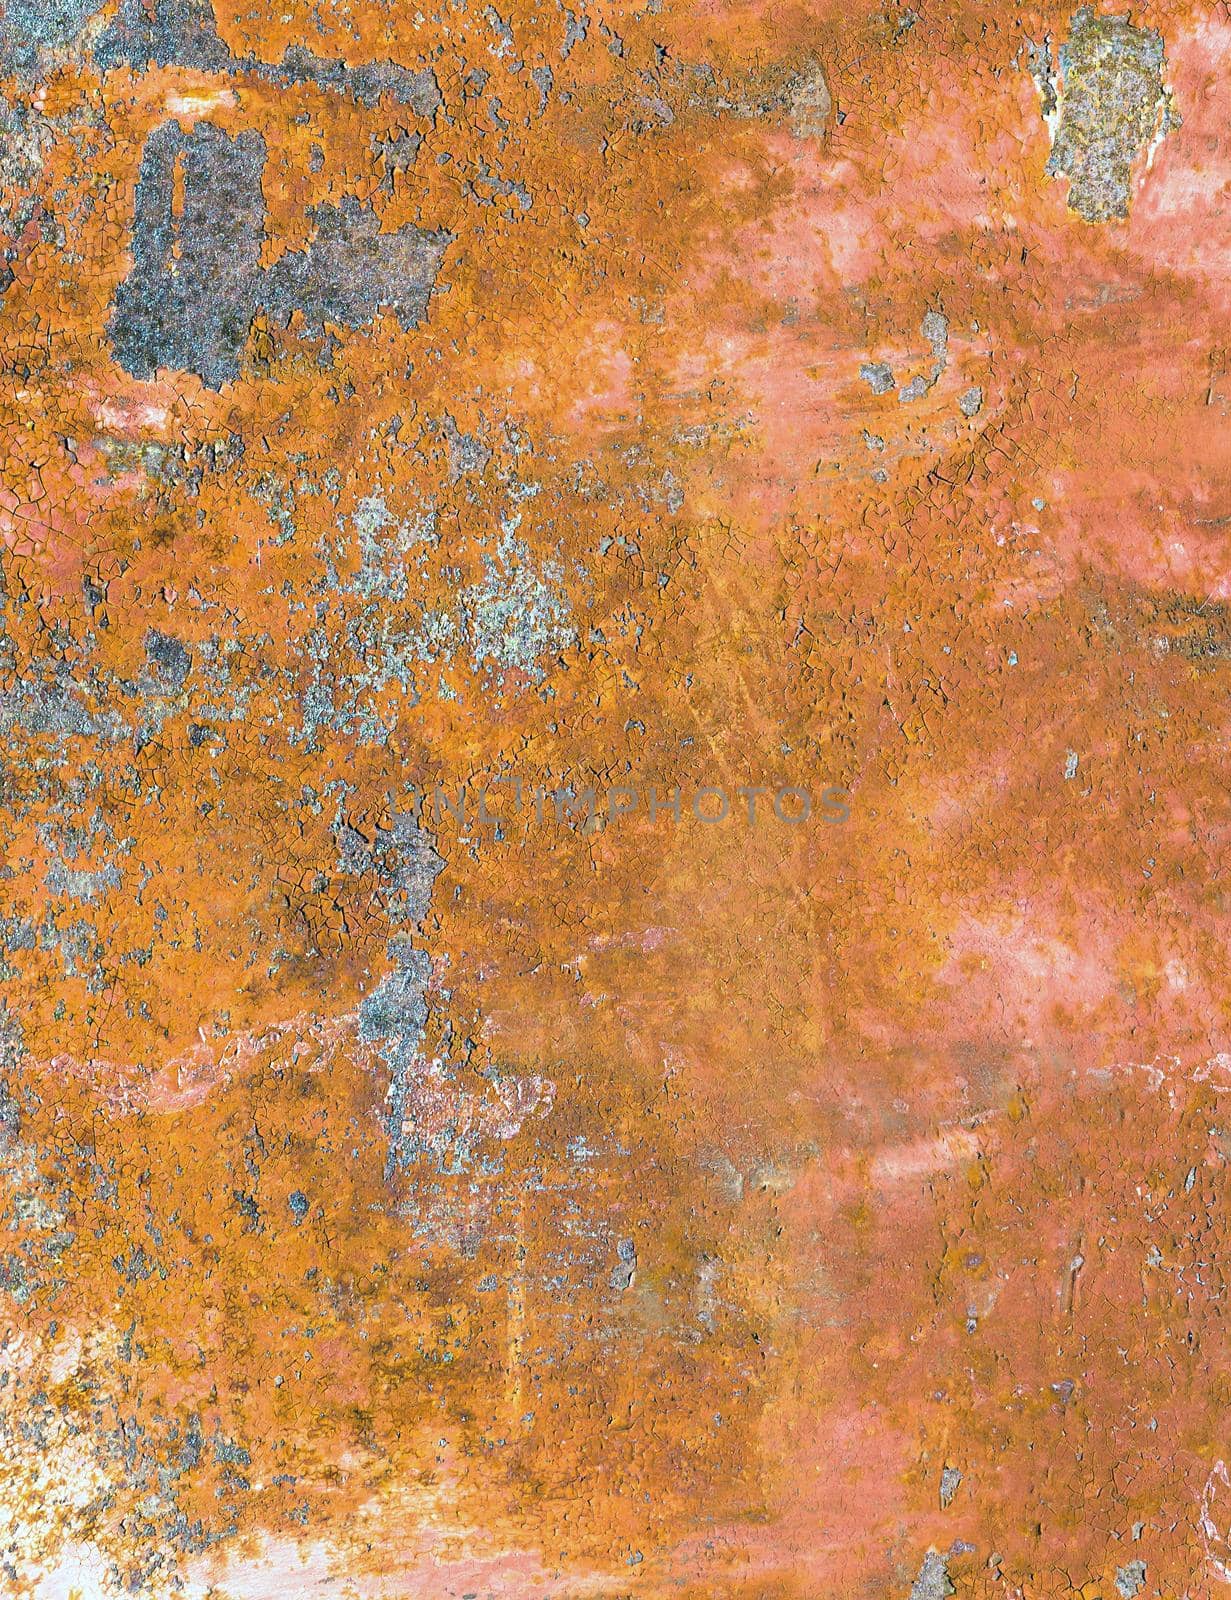 Vertical rusty metal background. Rusted metal plate with peeling paint. Severe metal corrosion. Grungy texture. Background series.